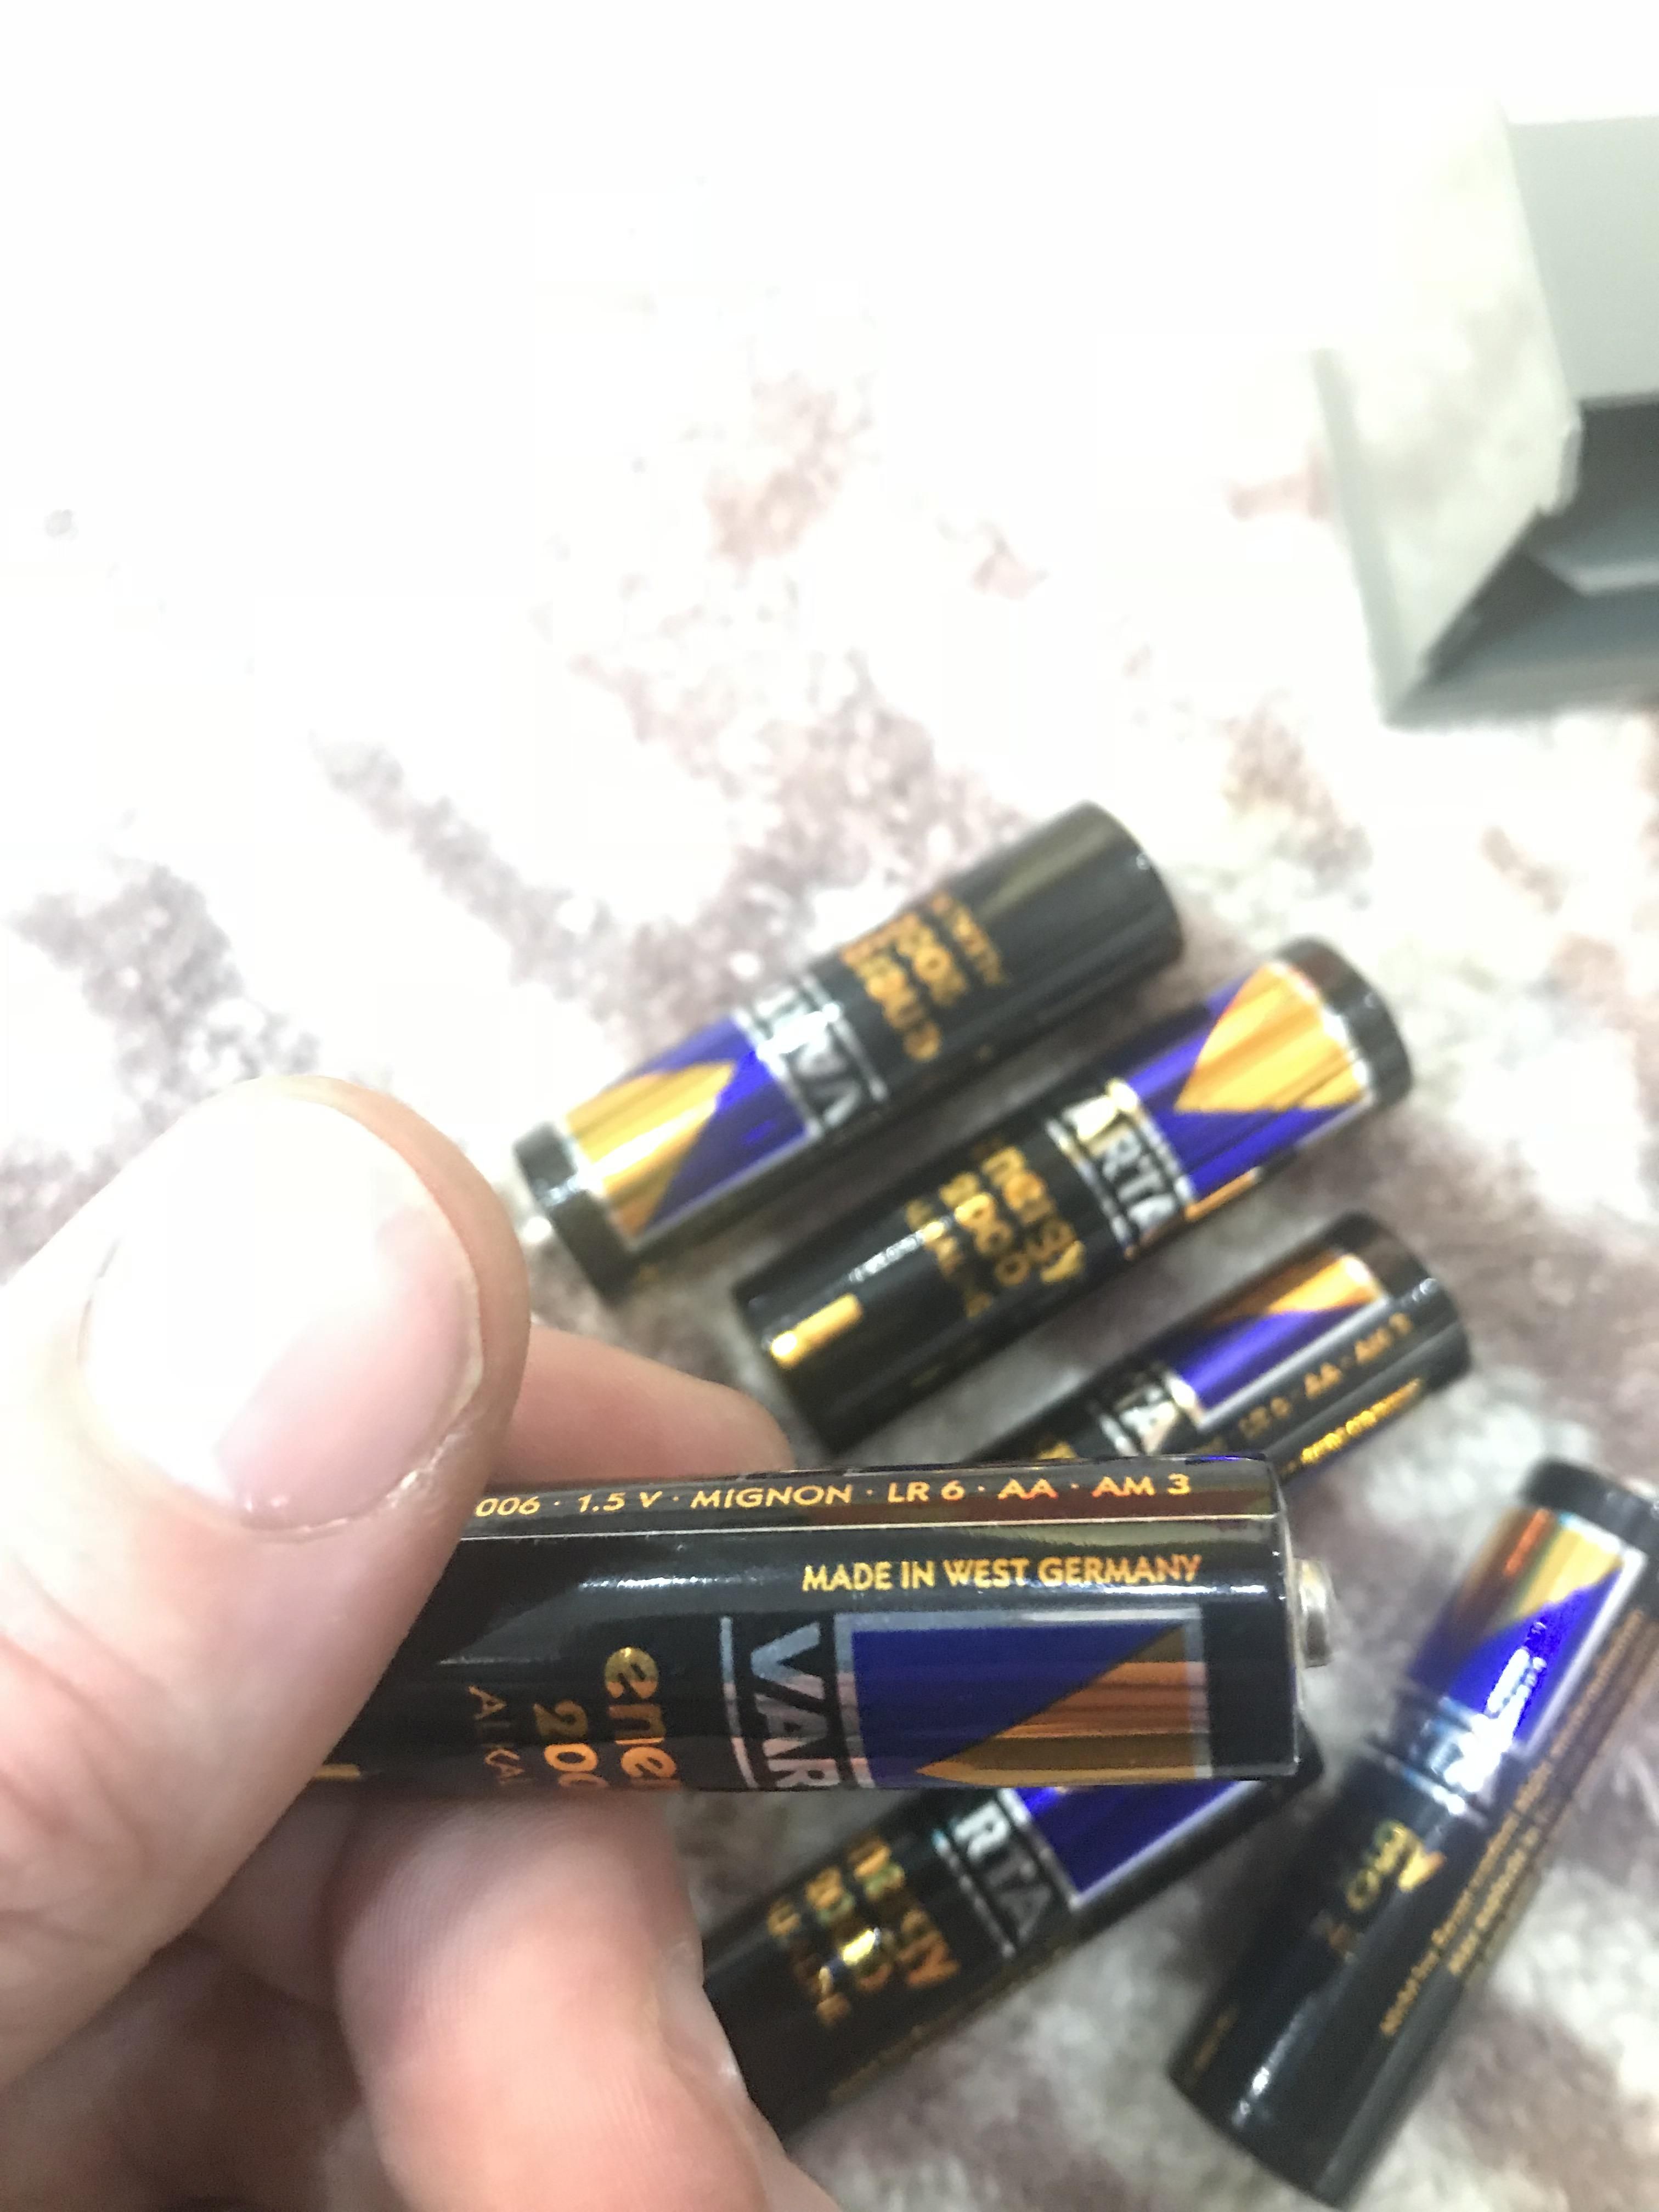 Just gifted some of my old Lego to my nephew. Think these batteries might need to be replaced...